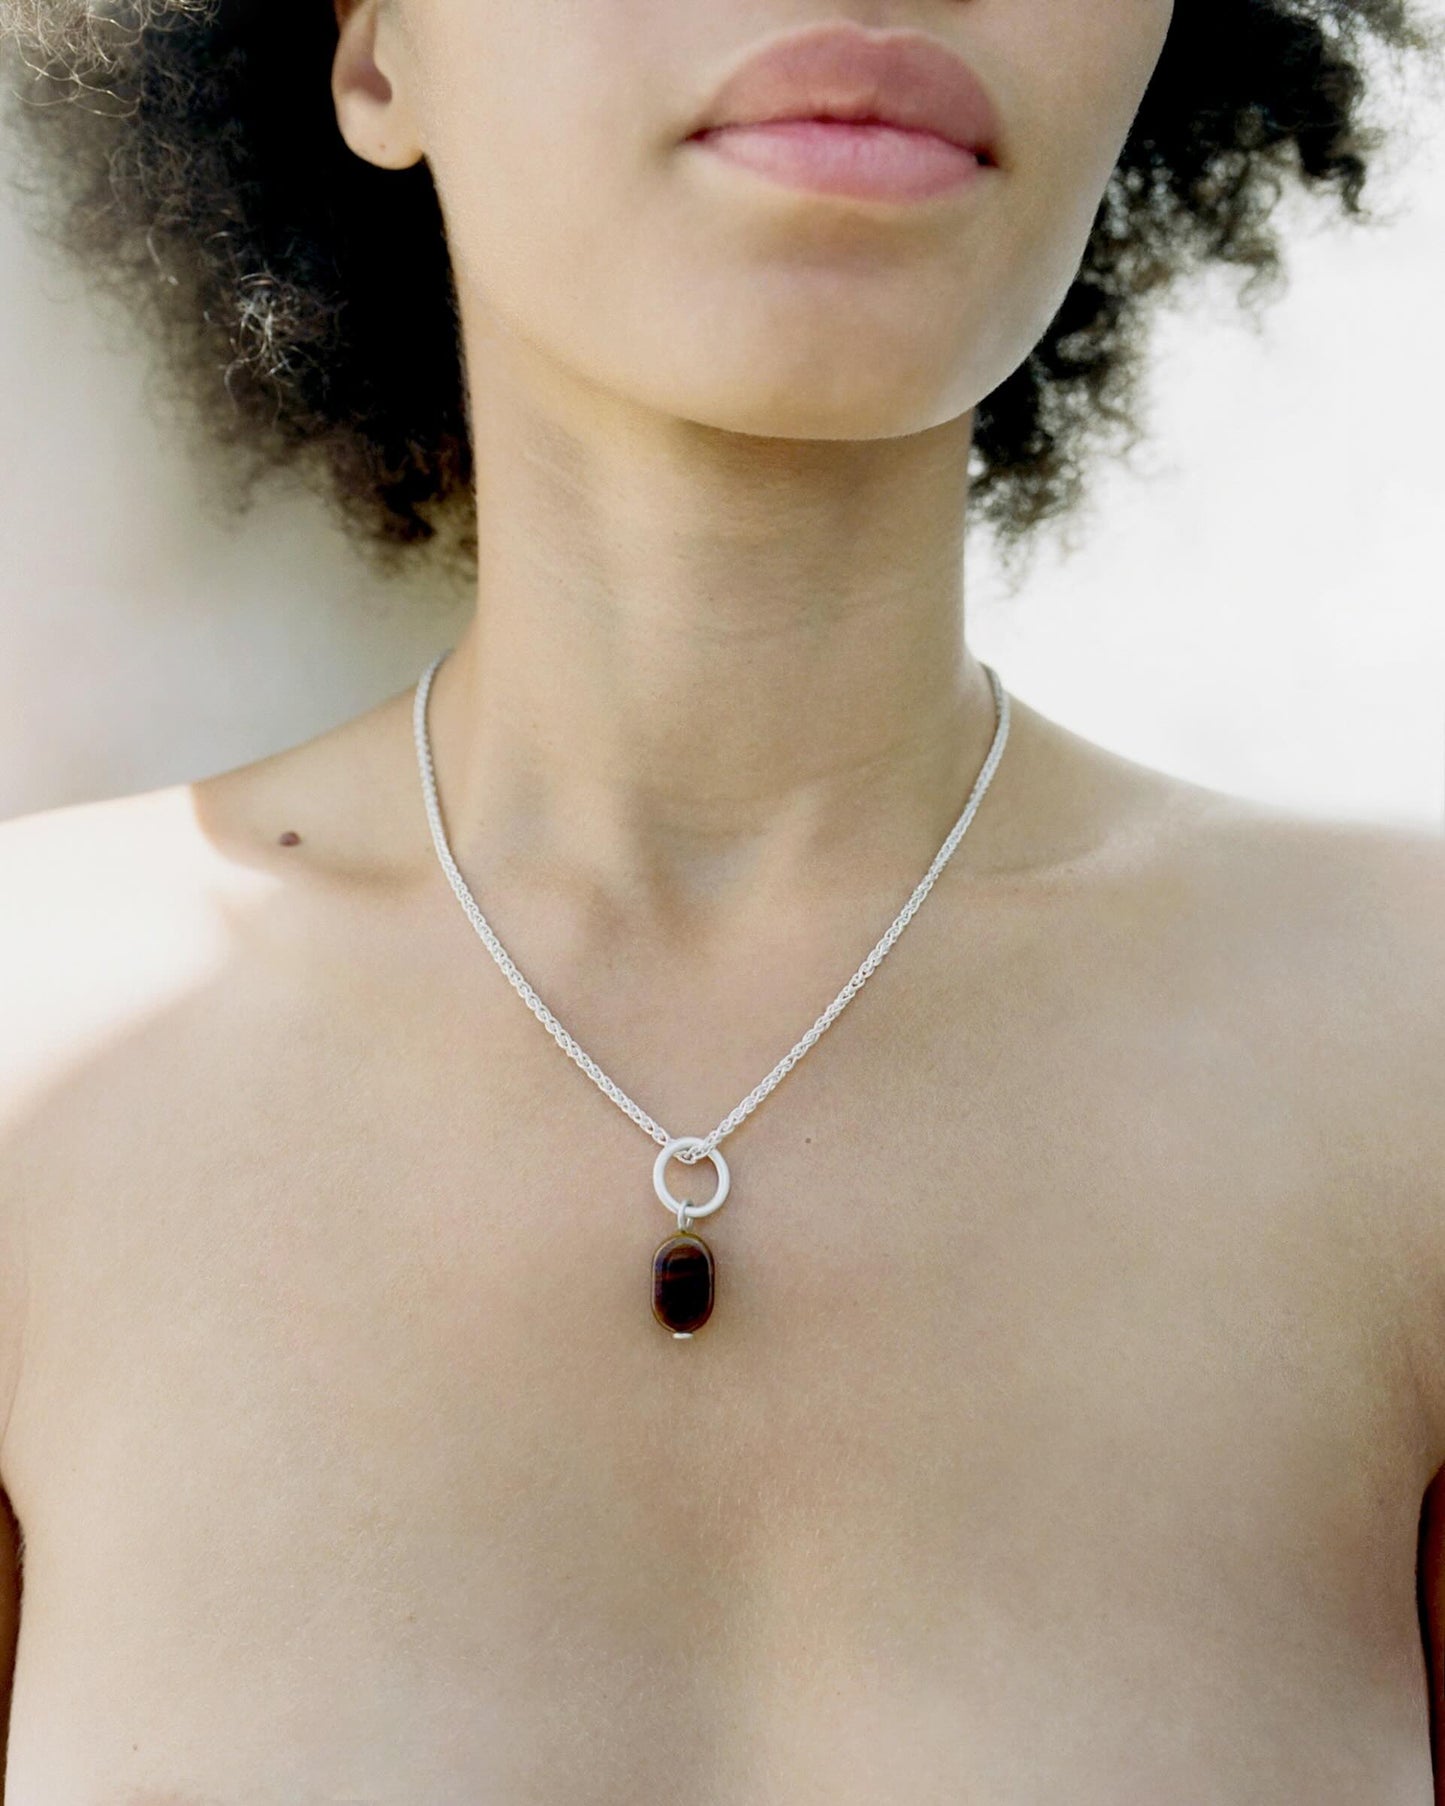 Tiana Marie Combes Glass Pendant in Sterling Silver.